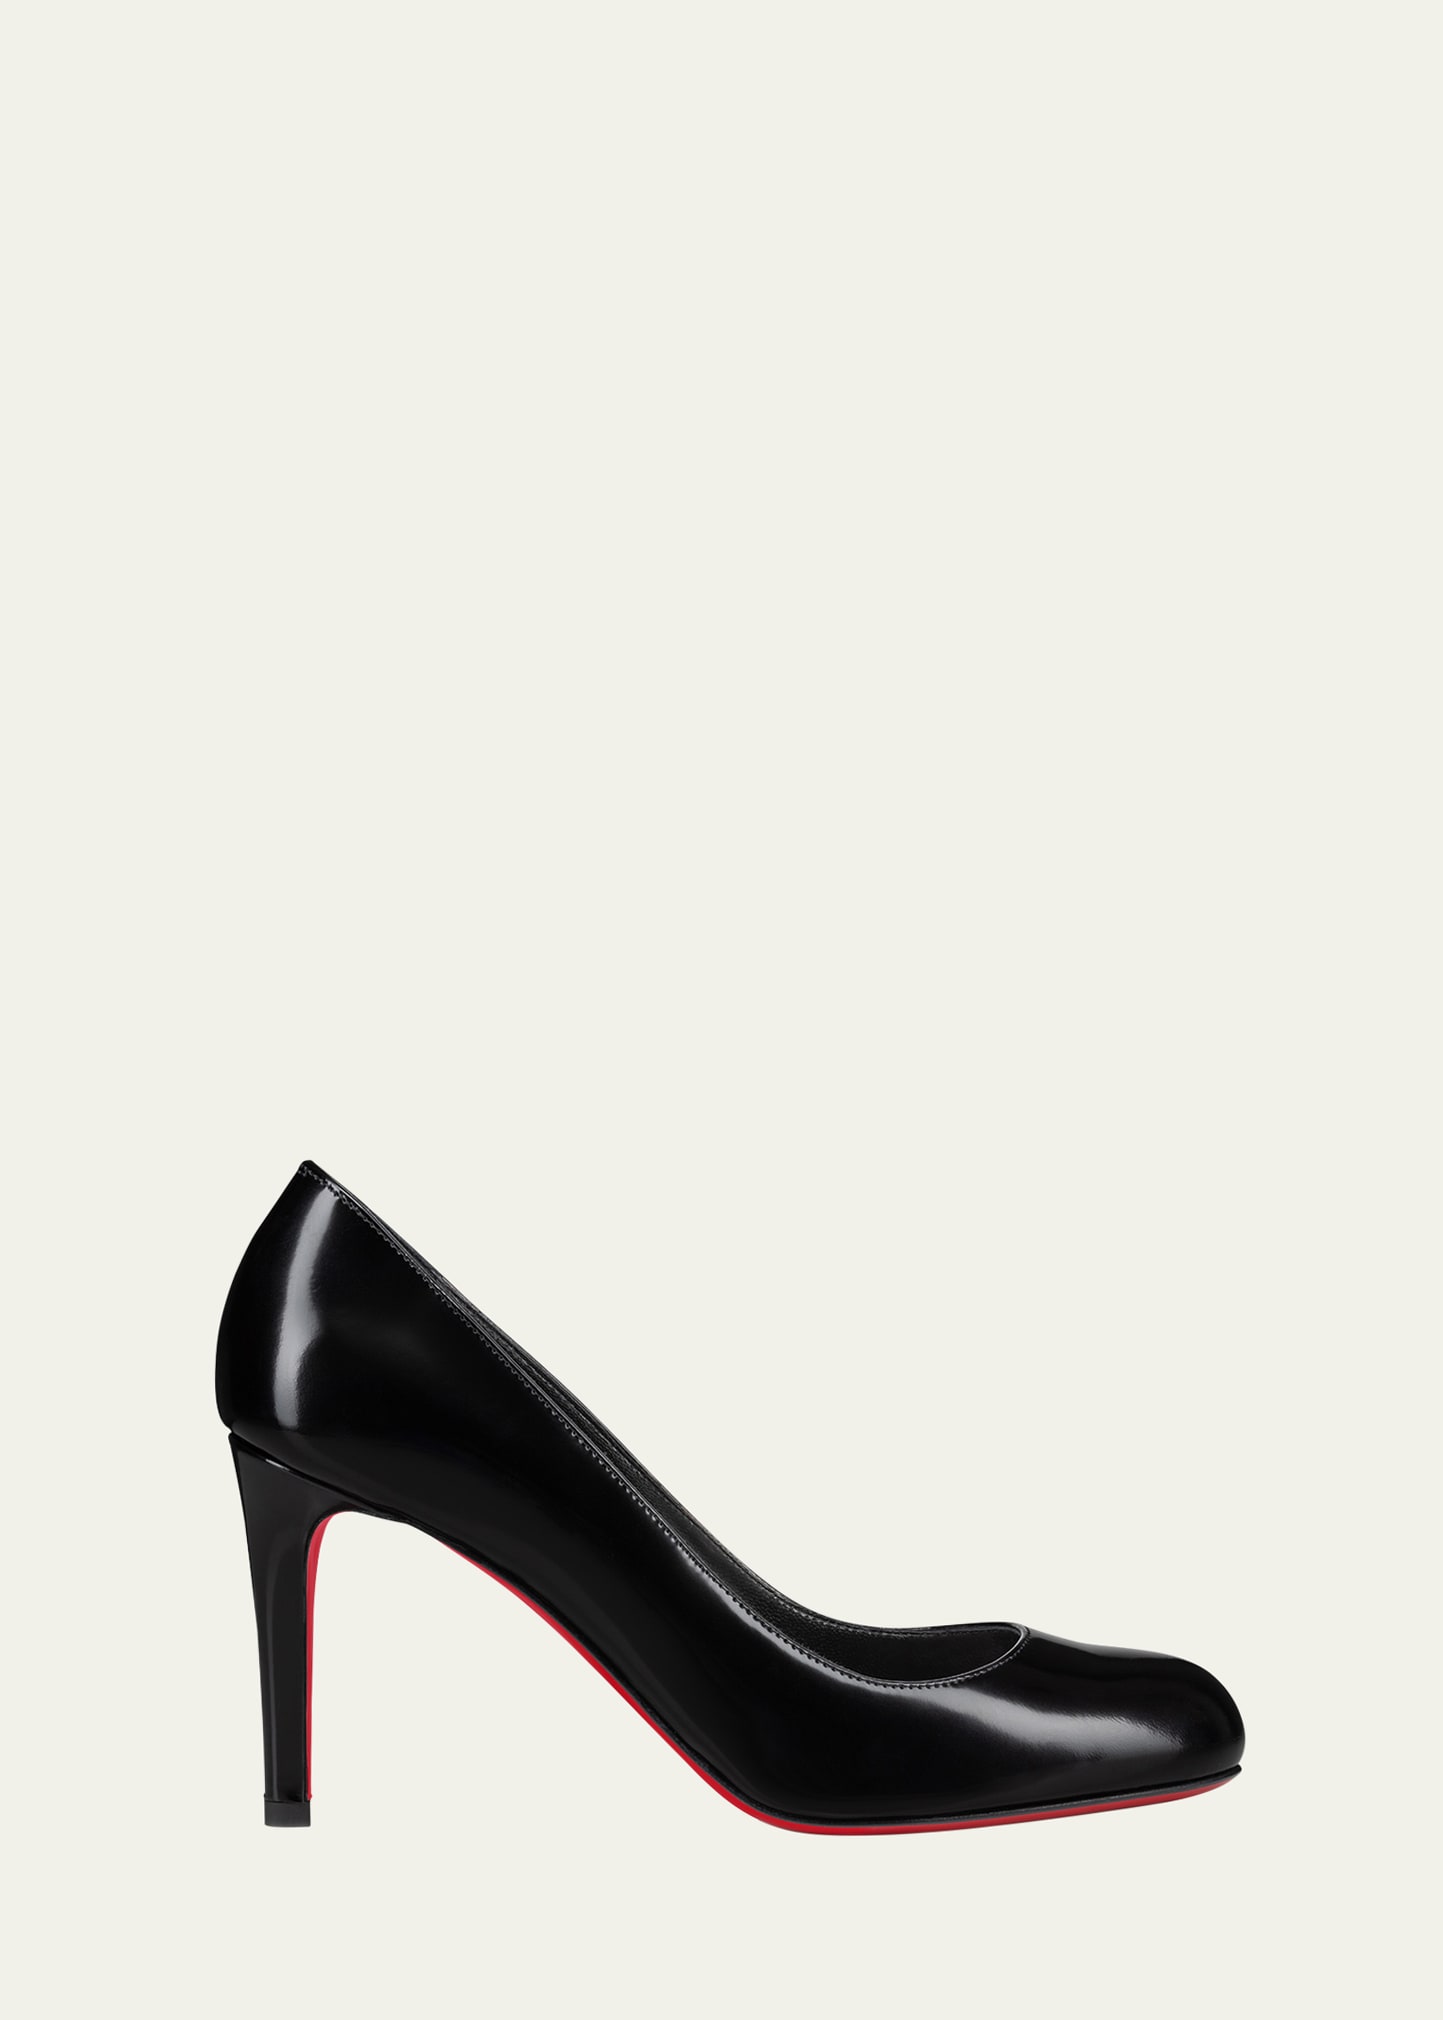 Christian Louboutin Pumppie Abrasivato Red Sole Calfskin Leather Pumps In Black